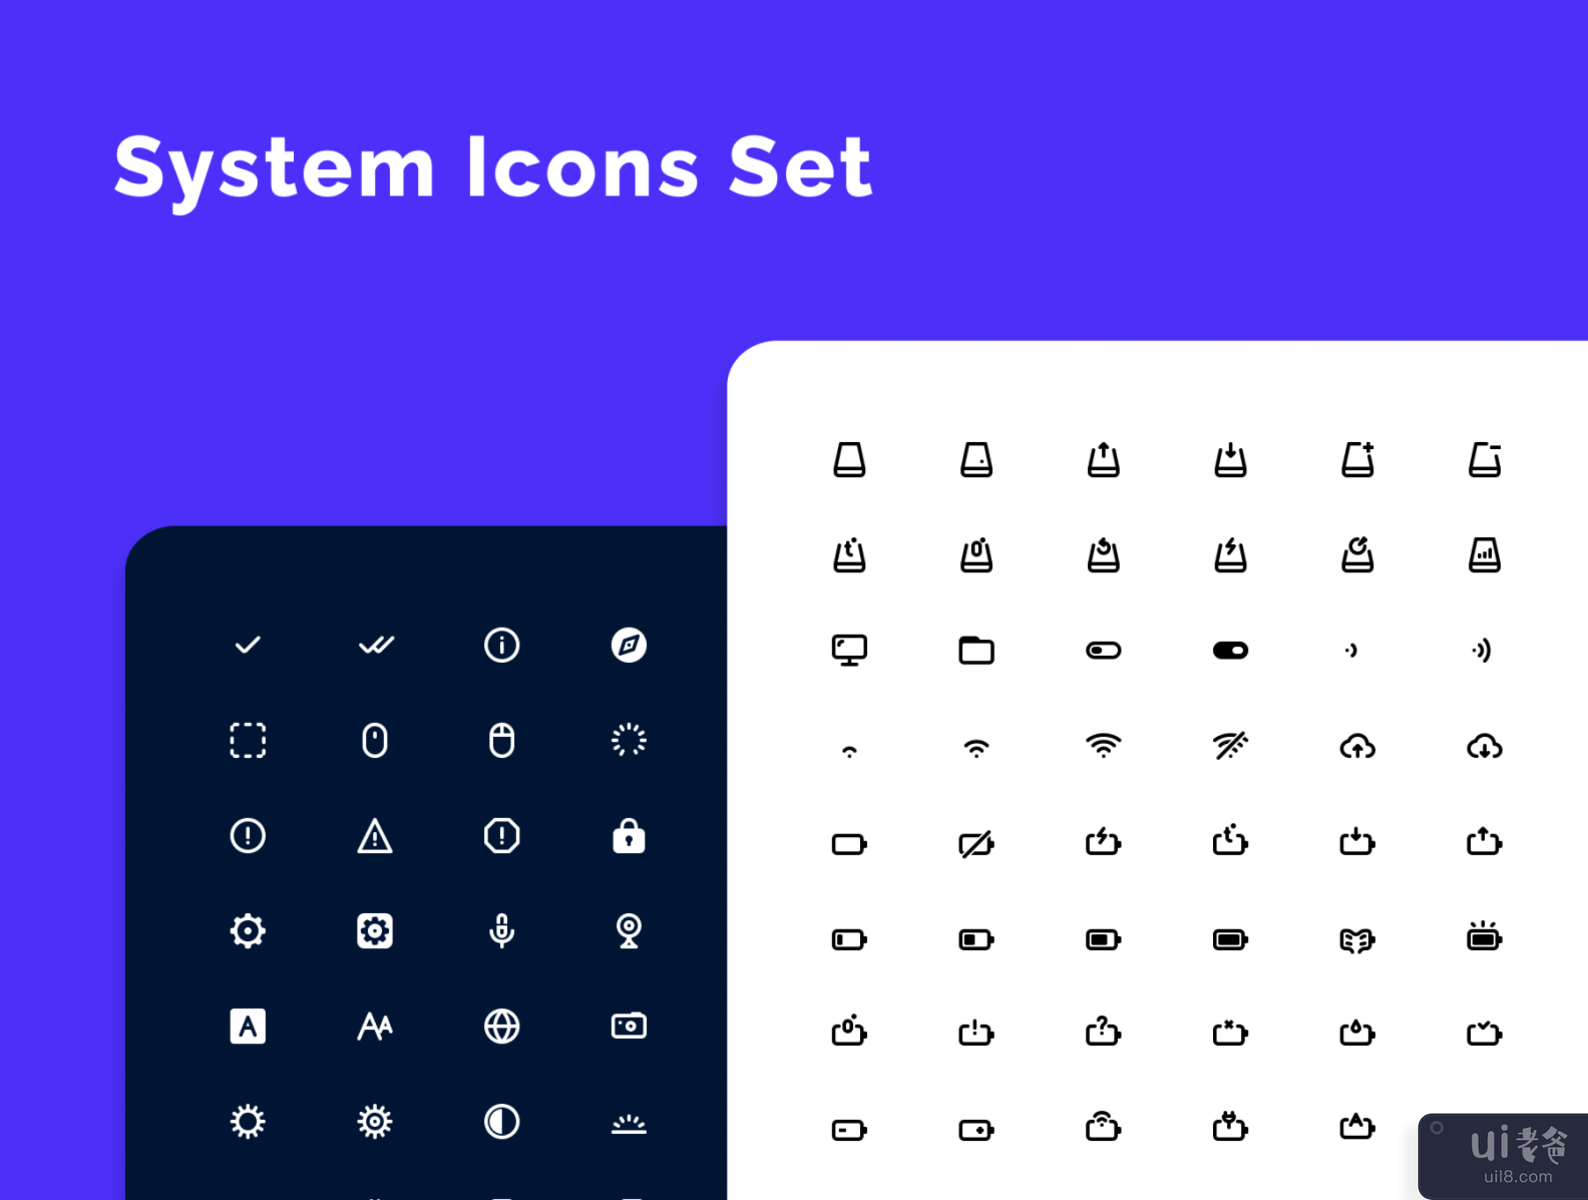 System Icons Set